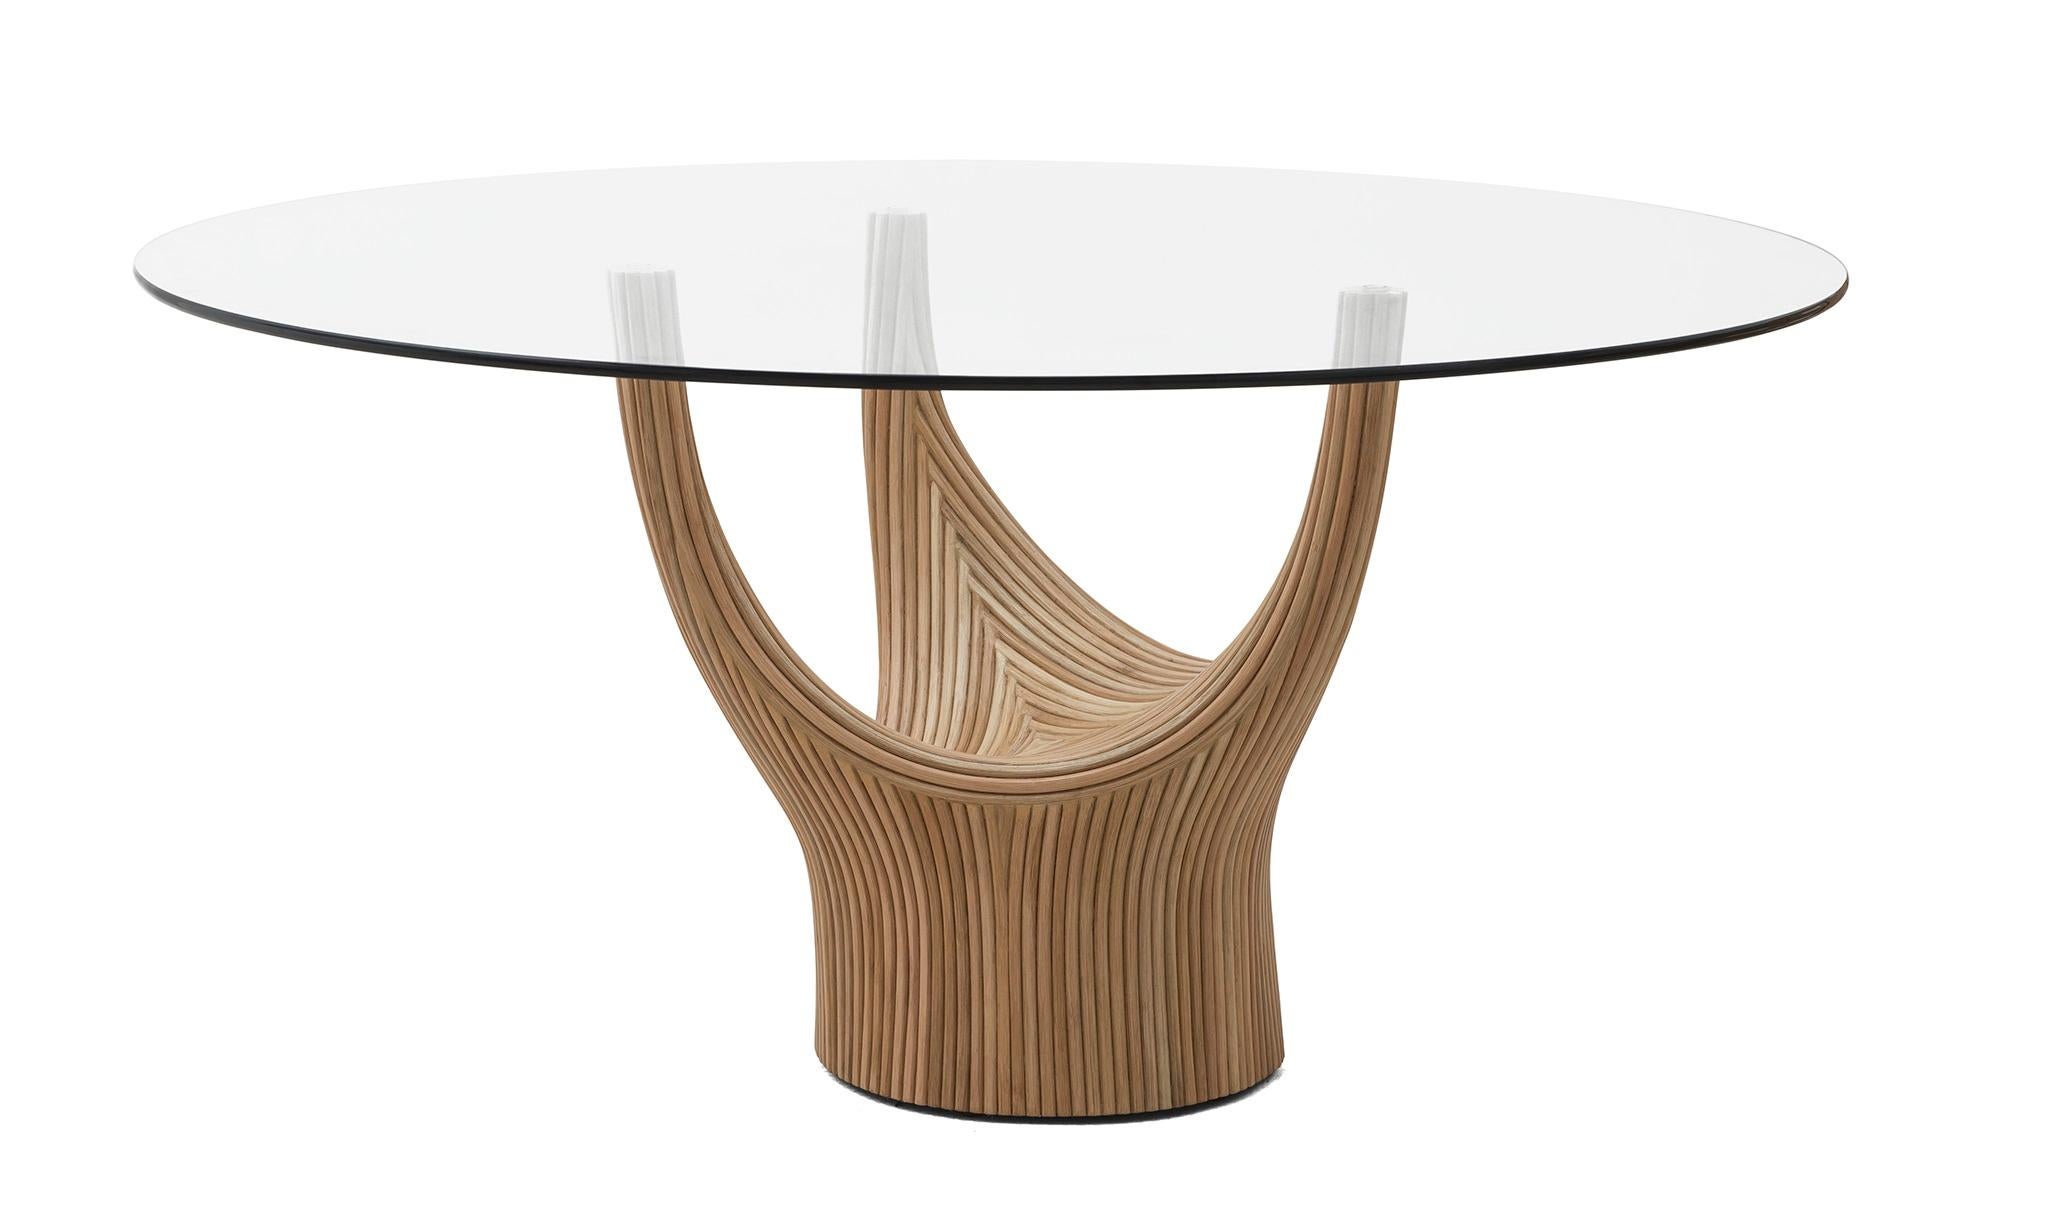 Dining table by Kenneth Cobonpue
Materials: Rattan, steel, glass. Whitewash top, natural base.
Dimensions: 150 x 58.5 x H 74 cm

Inspired by the ancient baobab, the table collection is made of rattan poles fastened together to create sculptural